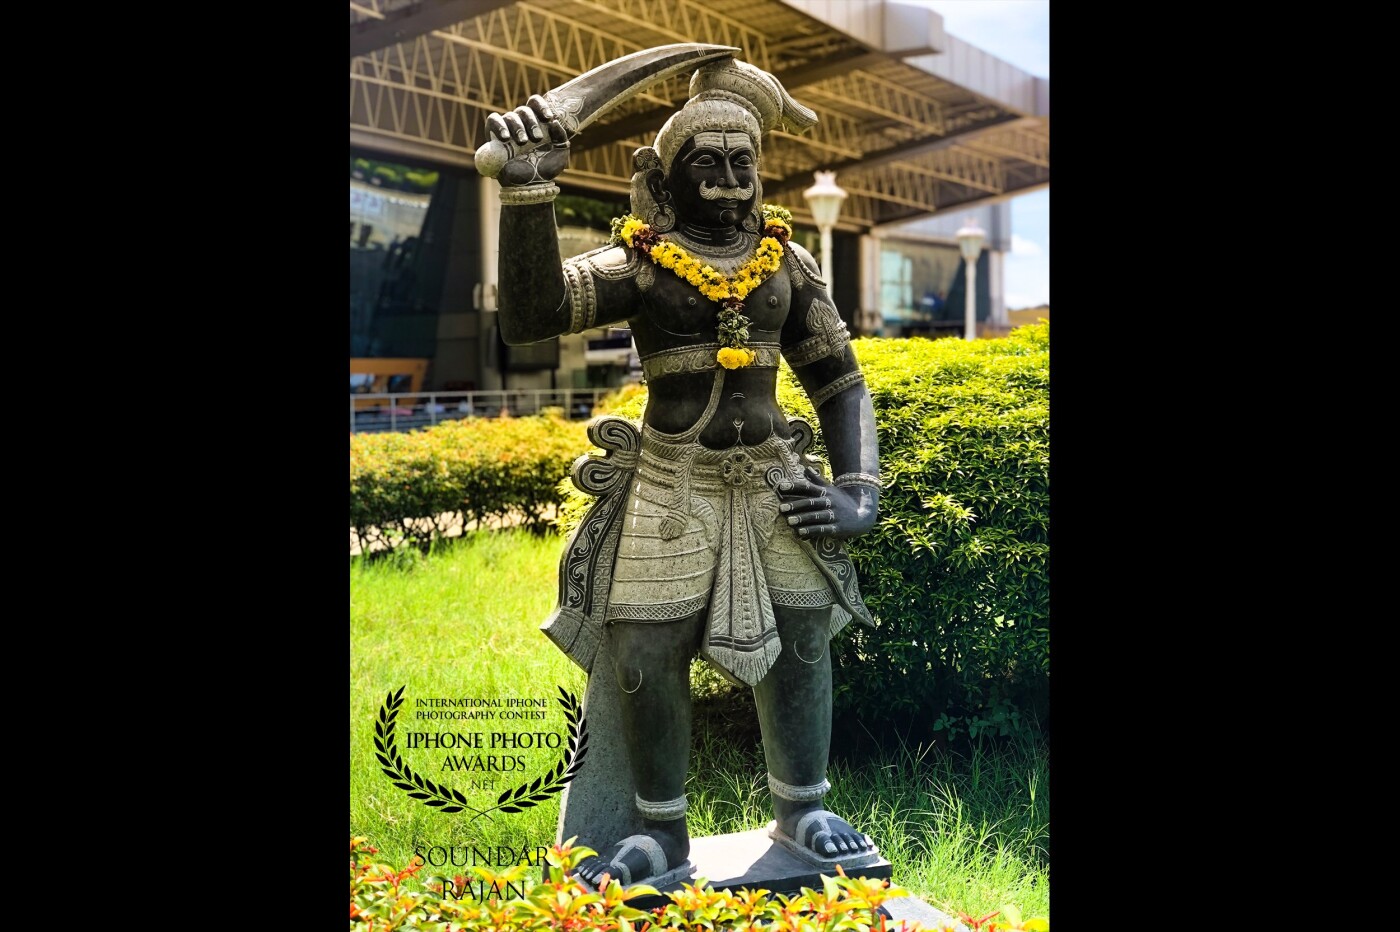 I am so glad that my home town #madurai photo have been selected and it gives an encouragement to click more awesome photos in the coming days .... <br />
<br />
Madurai Veeran (Tamil: மதுரை வீரன், lit. 'Warrior of Madurai', also known as Veeran) is a Tamil folk deity popular in southern Tamil Nadu, India. His name was derived as a result of his association with the city of Madurai as a protector of the city